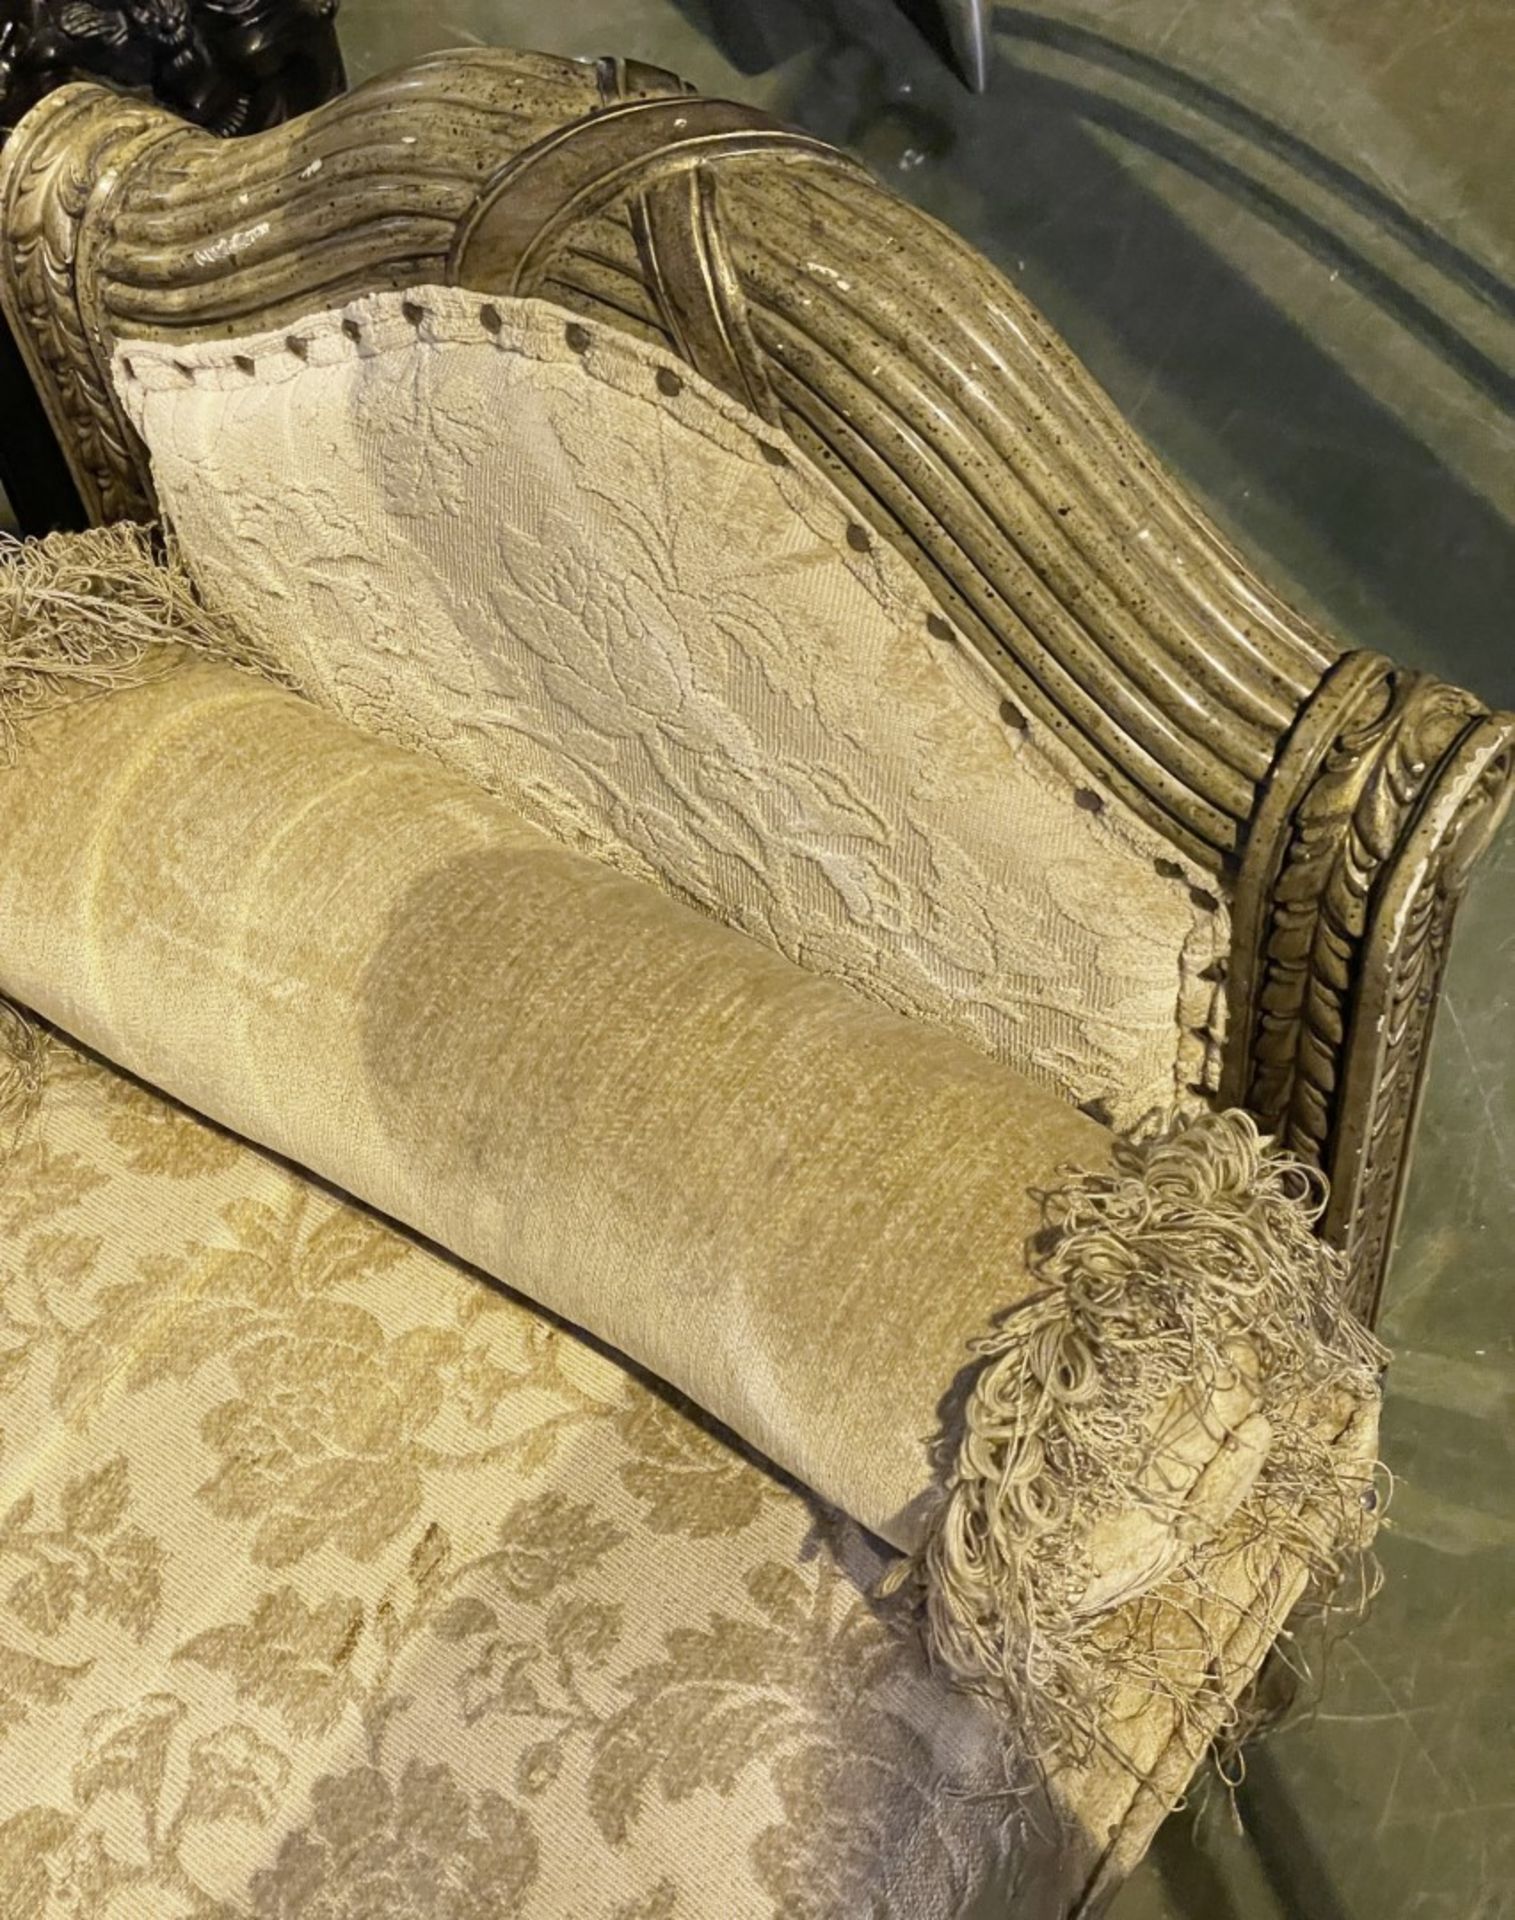 1 x Ornate And Beautifully Covered Chaise Longue With Roll Cushion - Approx 150X50X80Cm - Image 9 of 11